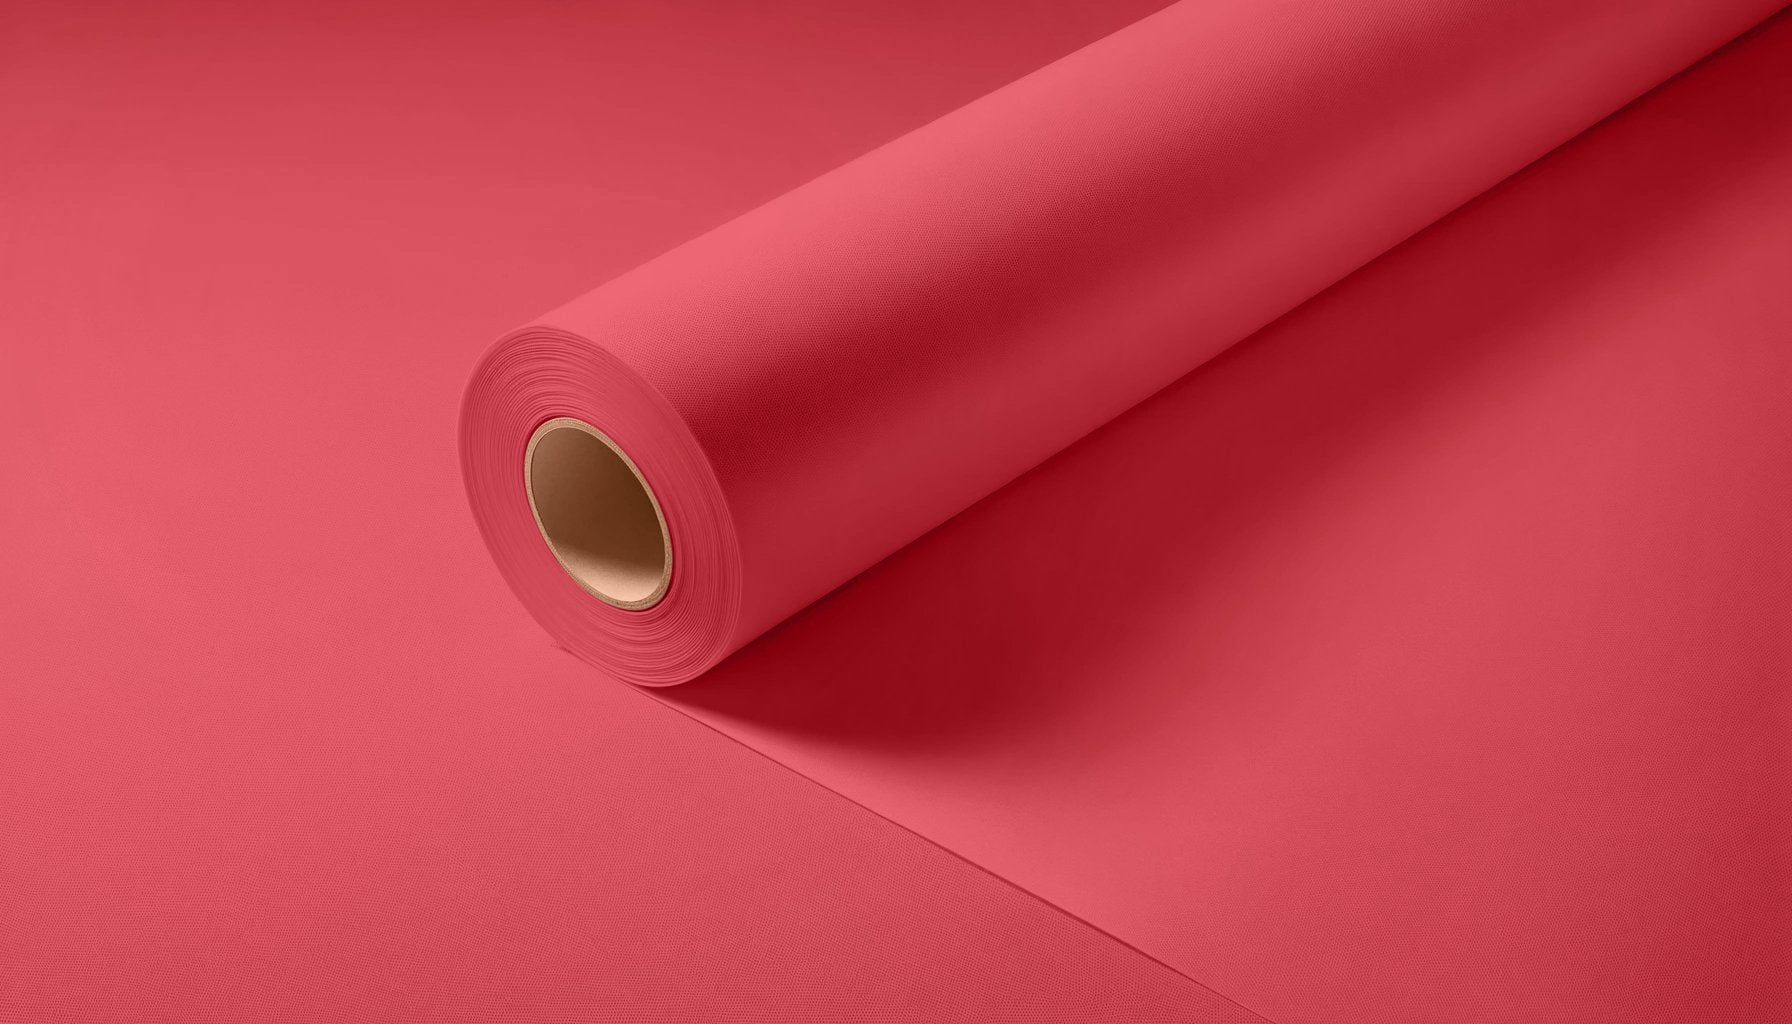 Peel & Stick Removable Re-usable Paint - Color RAL 3018 Strawberry Red - offRAL™ - RALRAW LLC, USA